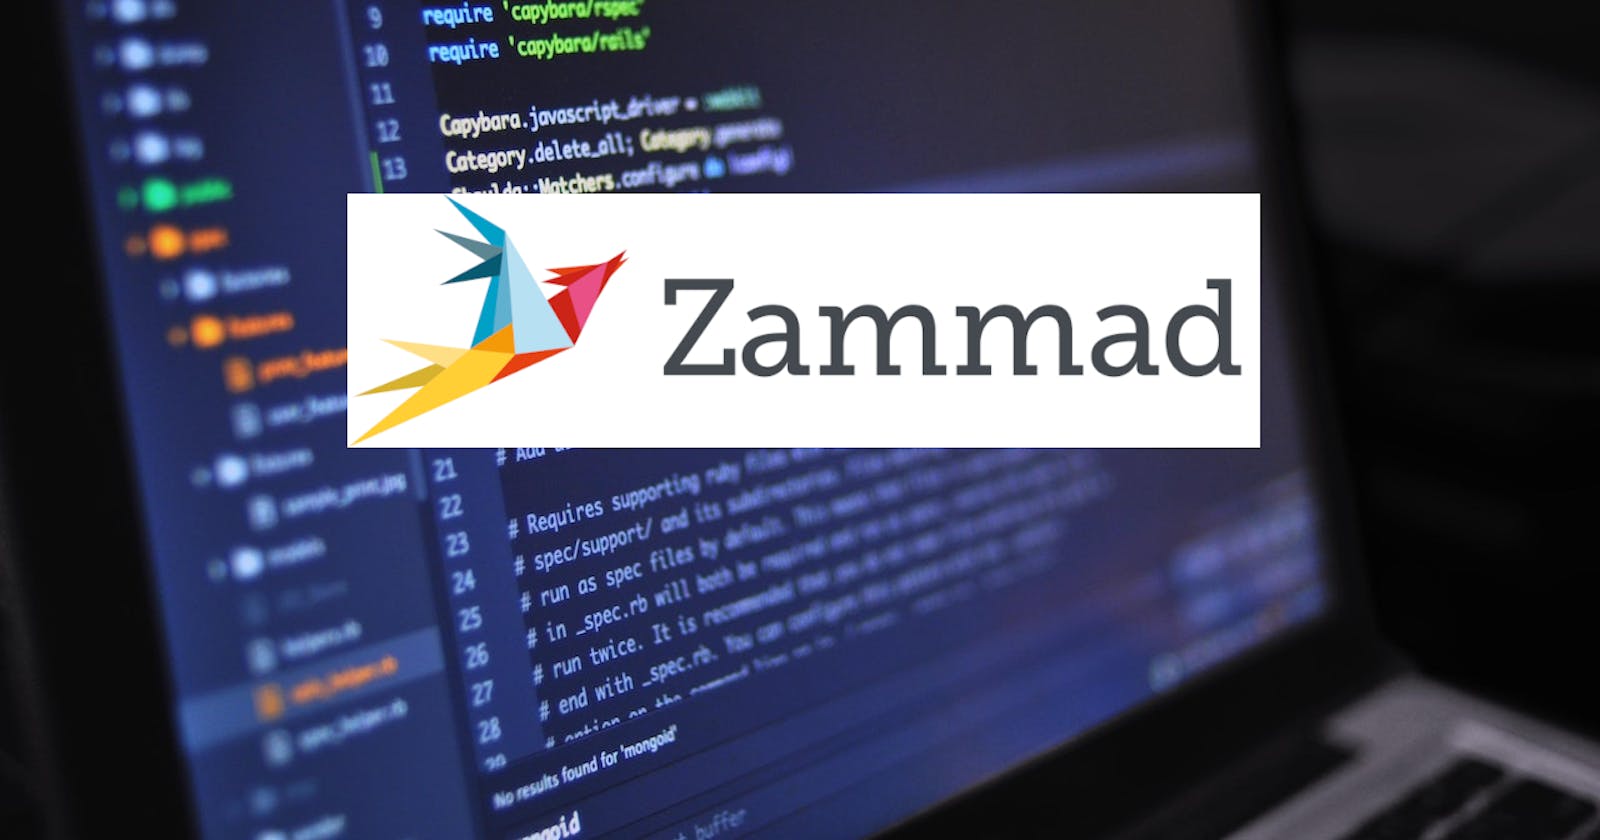 My first pull request to Zammad - Bump to Ruby v 3.1